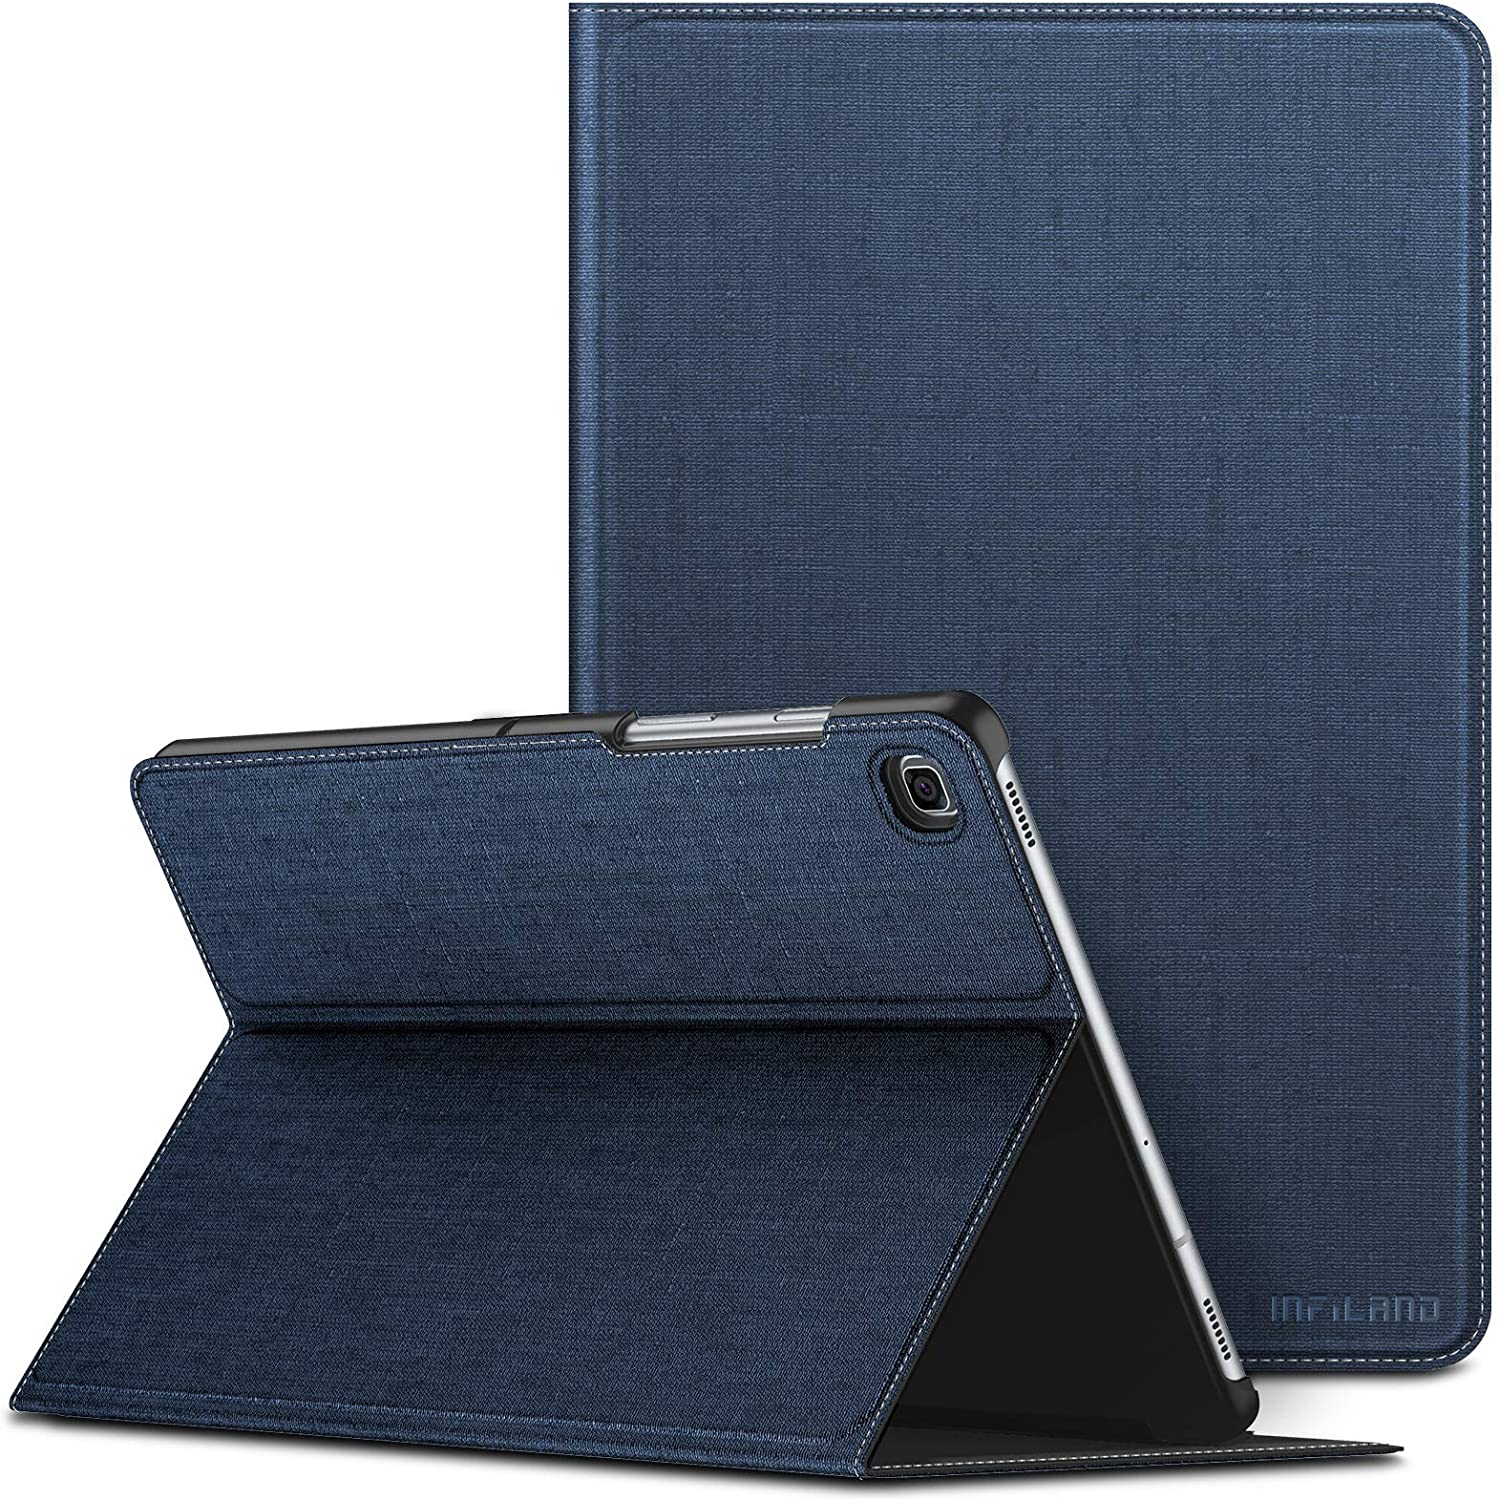 Infiland Samsung Galaxy Tab A 10.1 Case, Multiple Angle Stand Cover, Navy. - e4cents